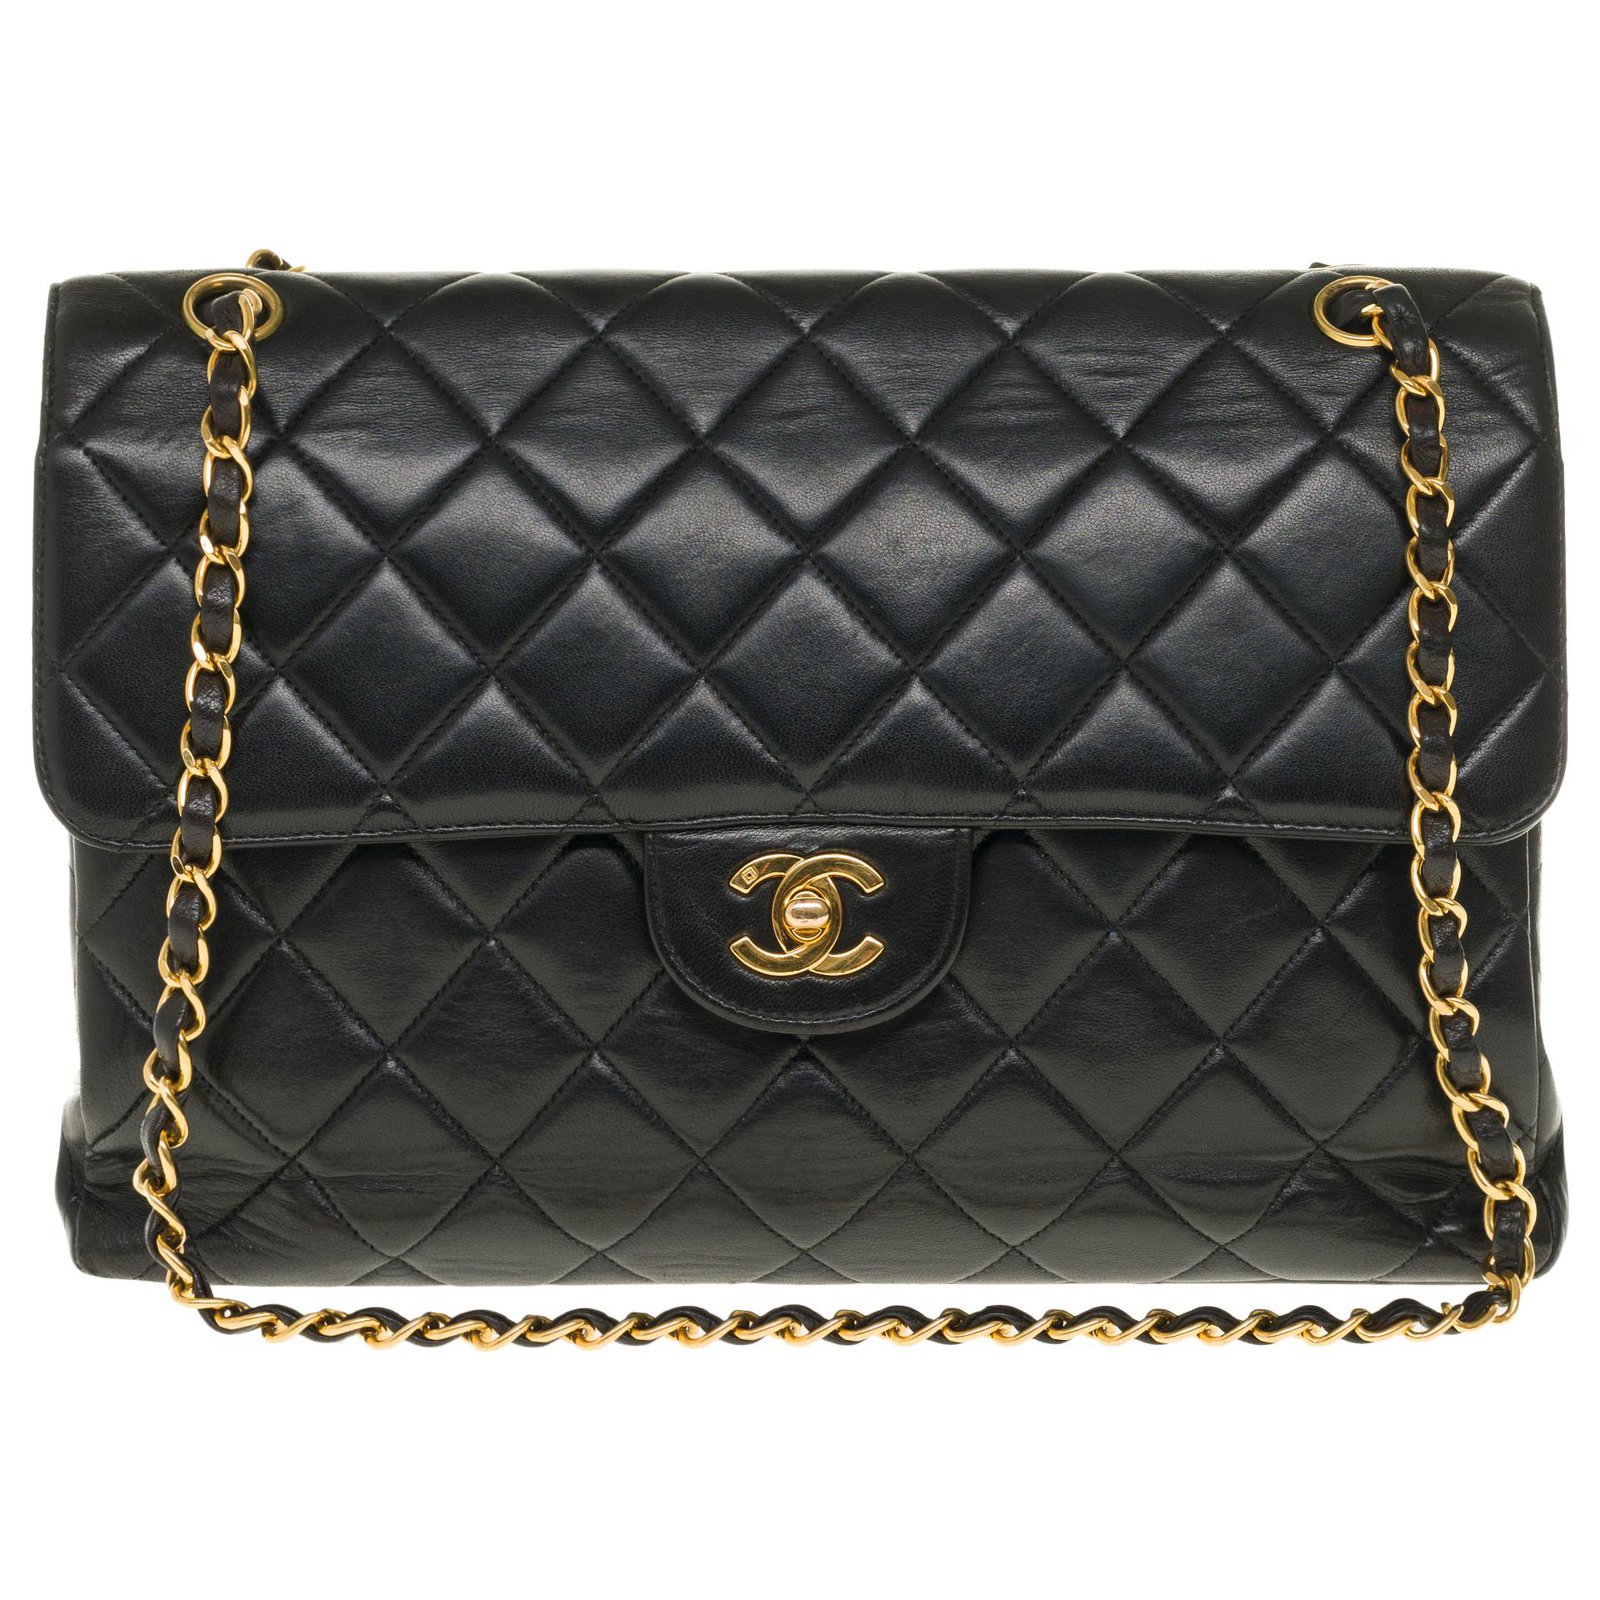 RARE CHANEL TIMELESS JUMBO lined-SIDED HANDBAG BLACK QUILTED